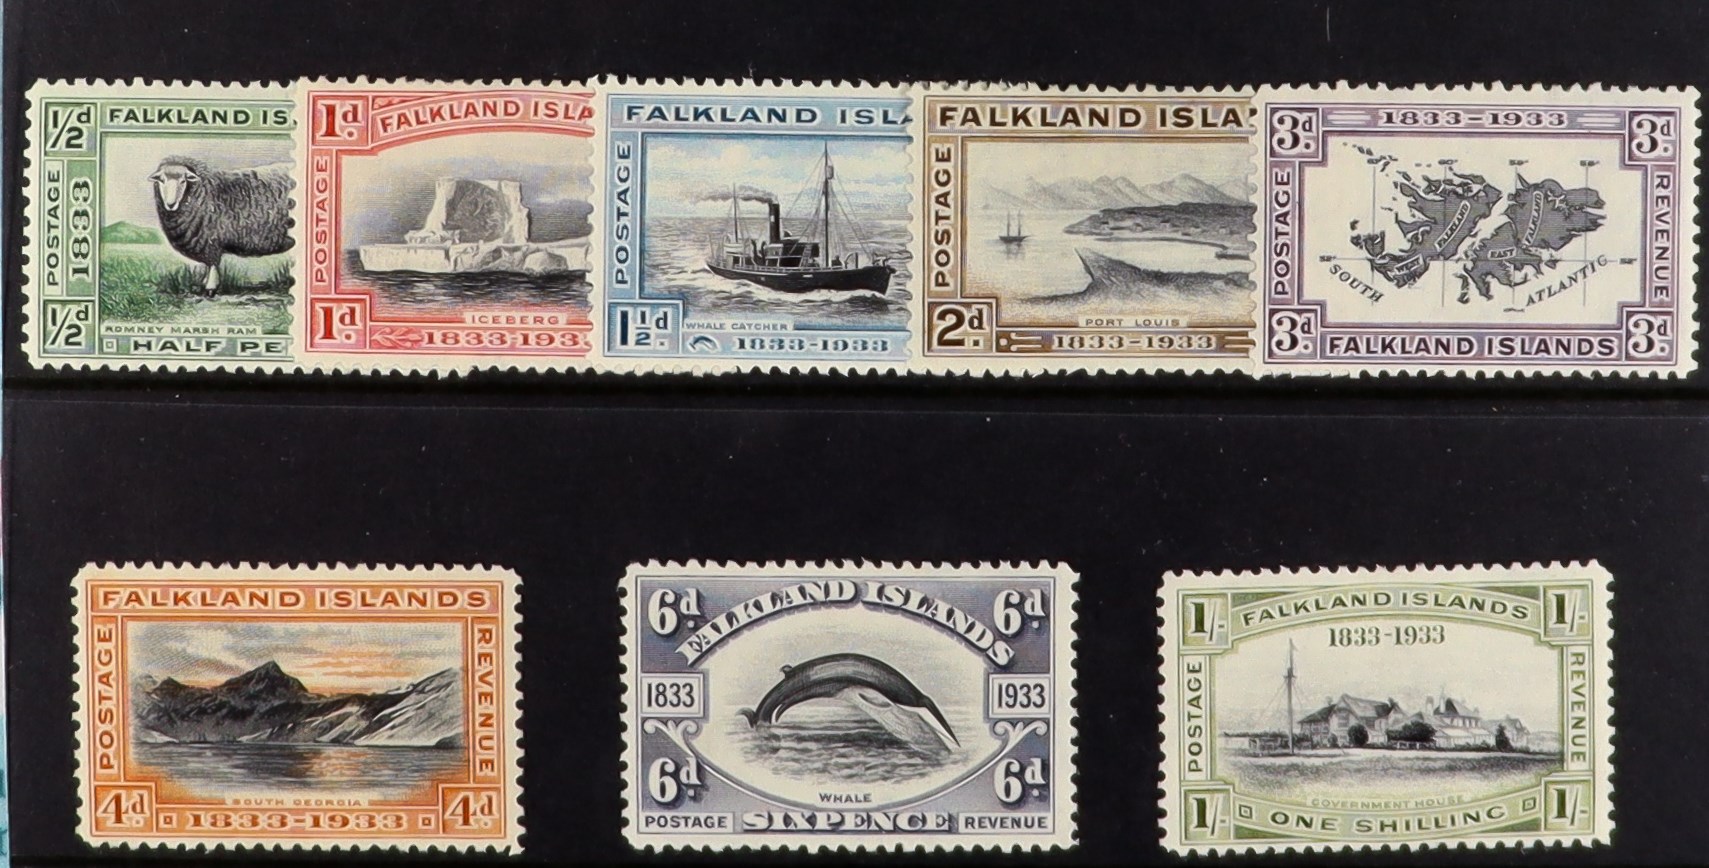 FALKLAND IS. 1933 Centenary of British Administration complete set, SG 127/138, very fine mint. - Image 2 of 2